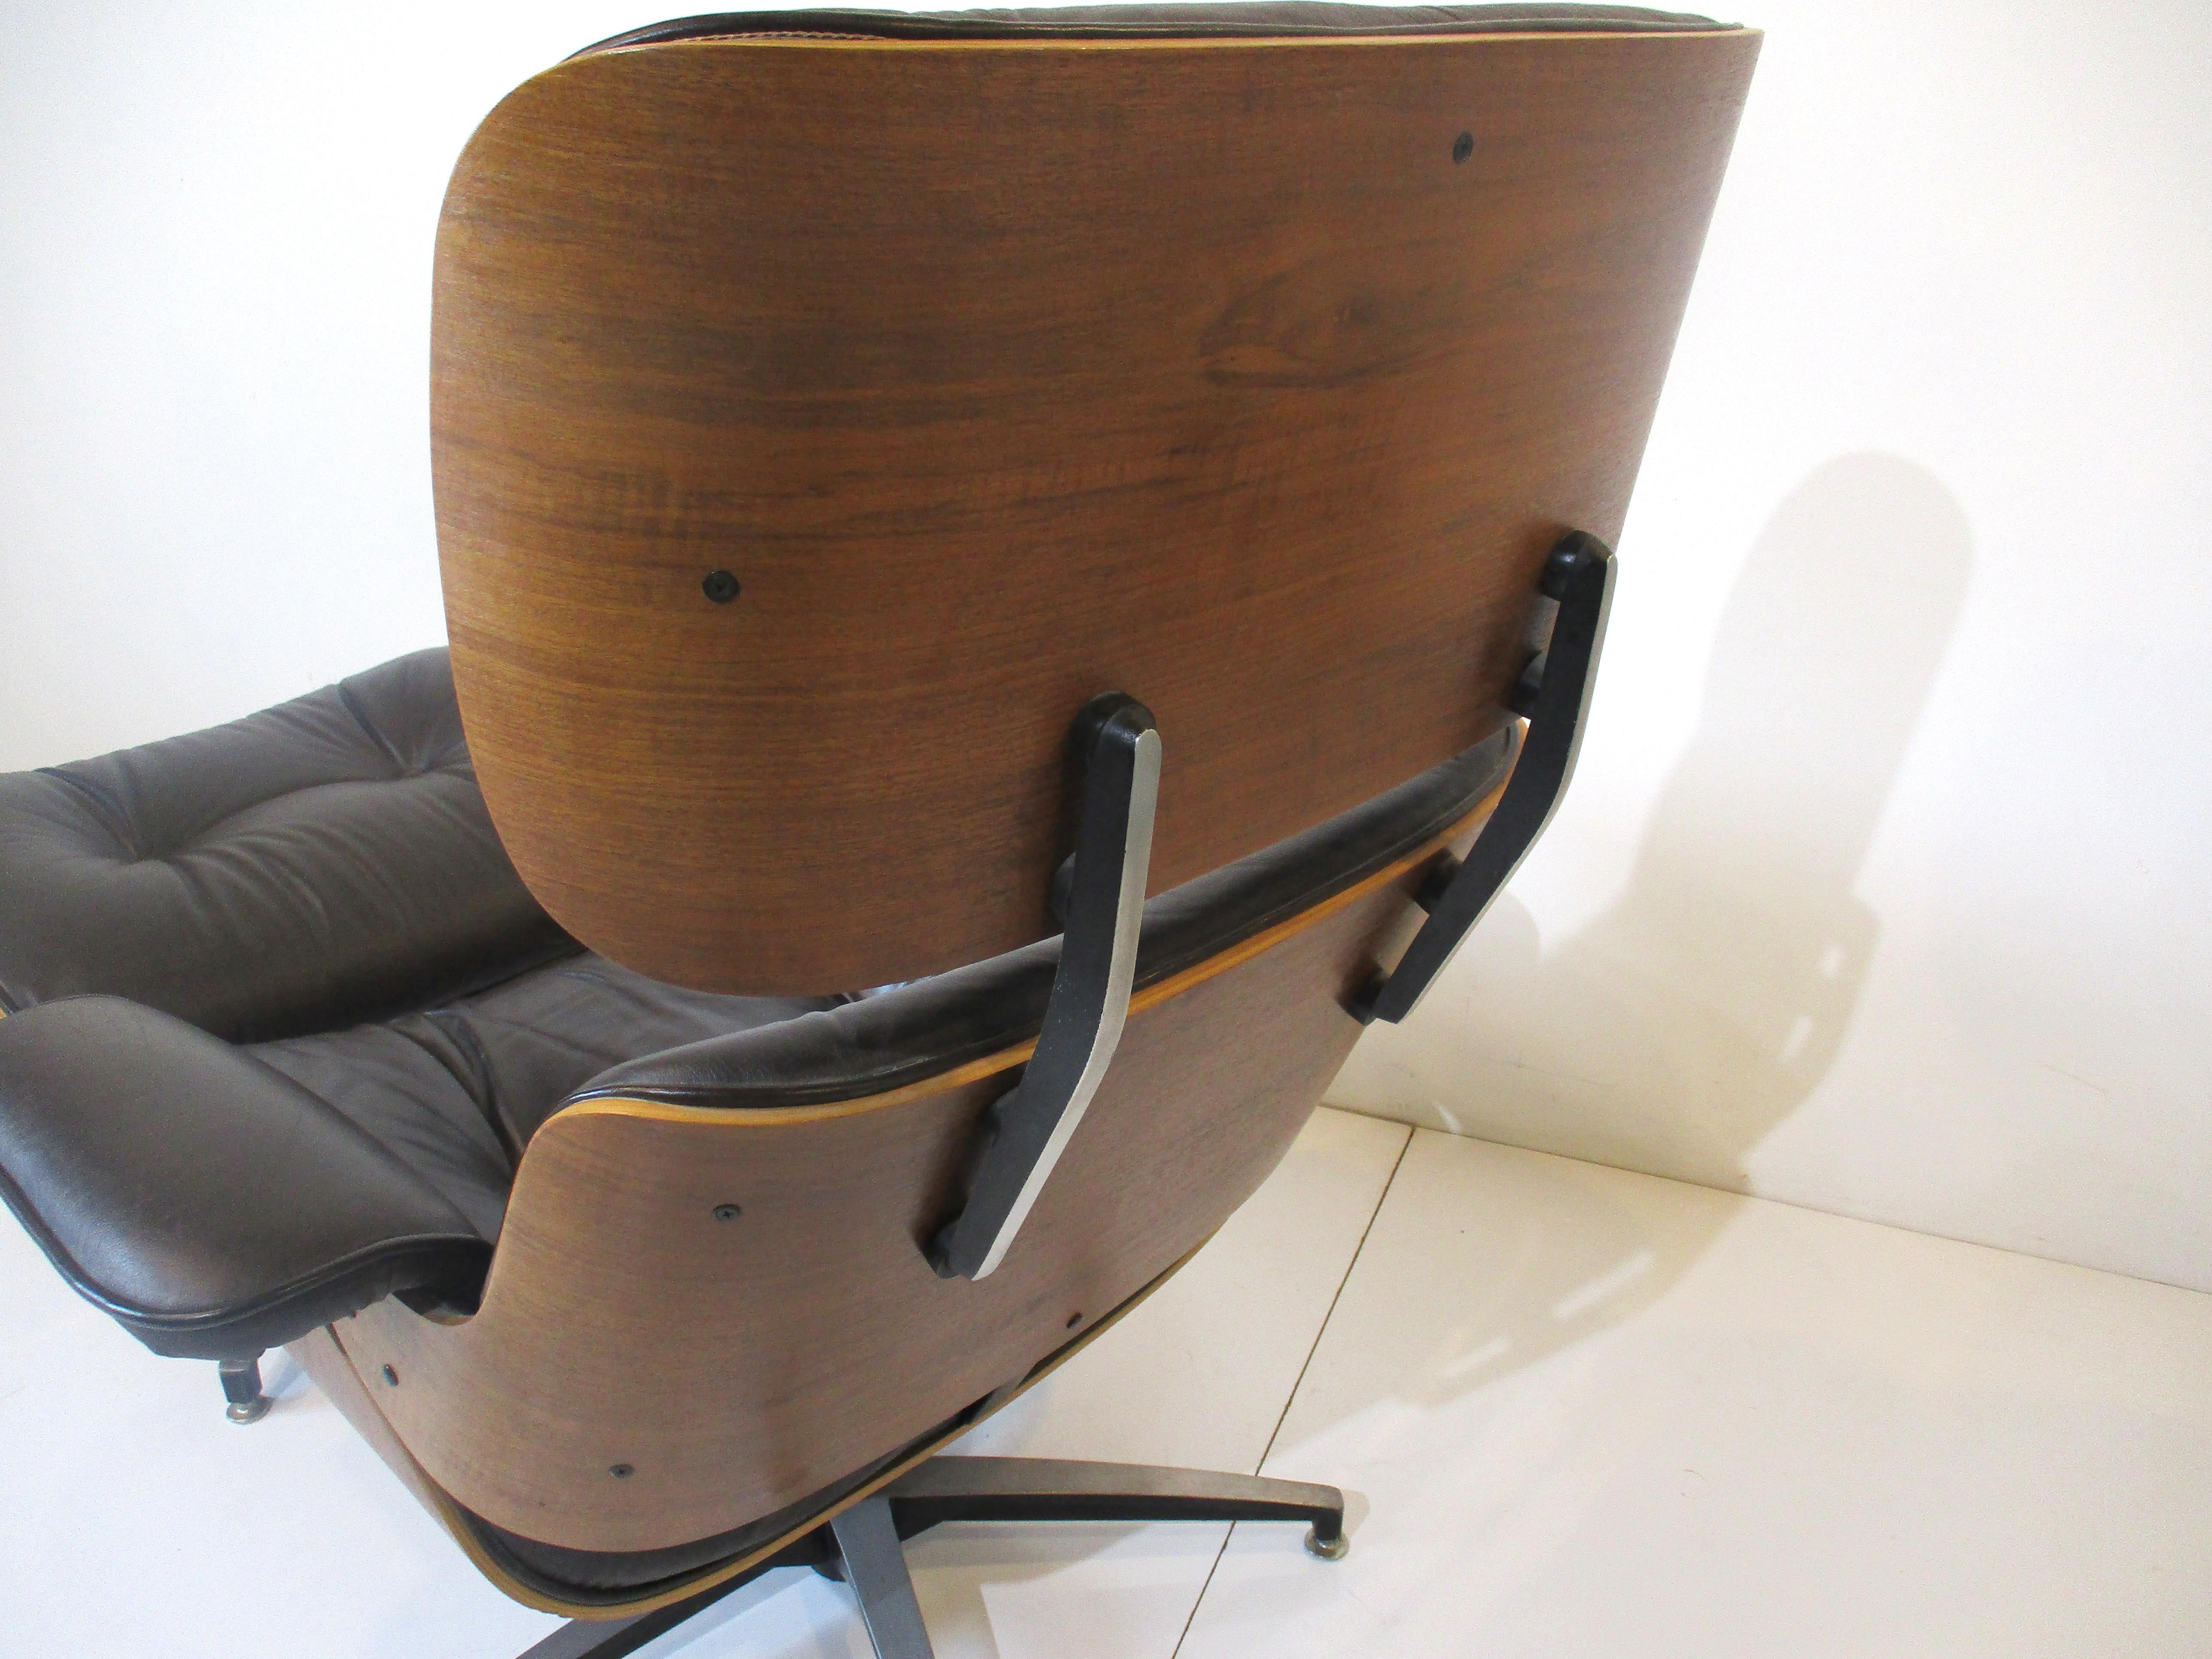 Selig Lounge Chair W/ Ottoman in Chocolate Leather in the Style of Eames 2